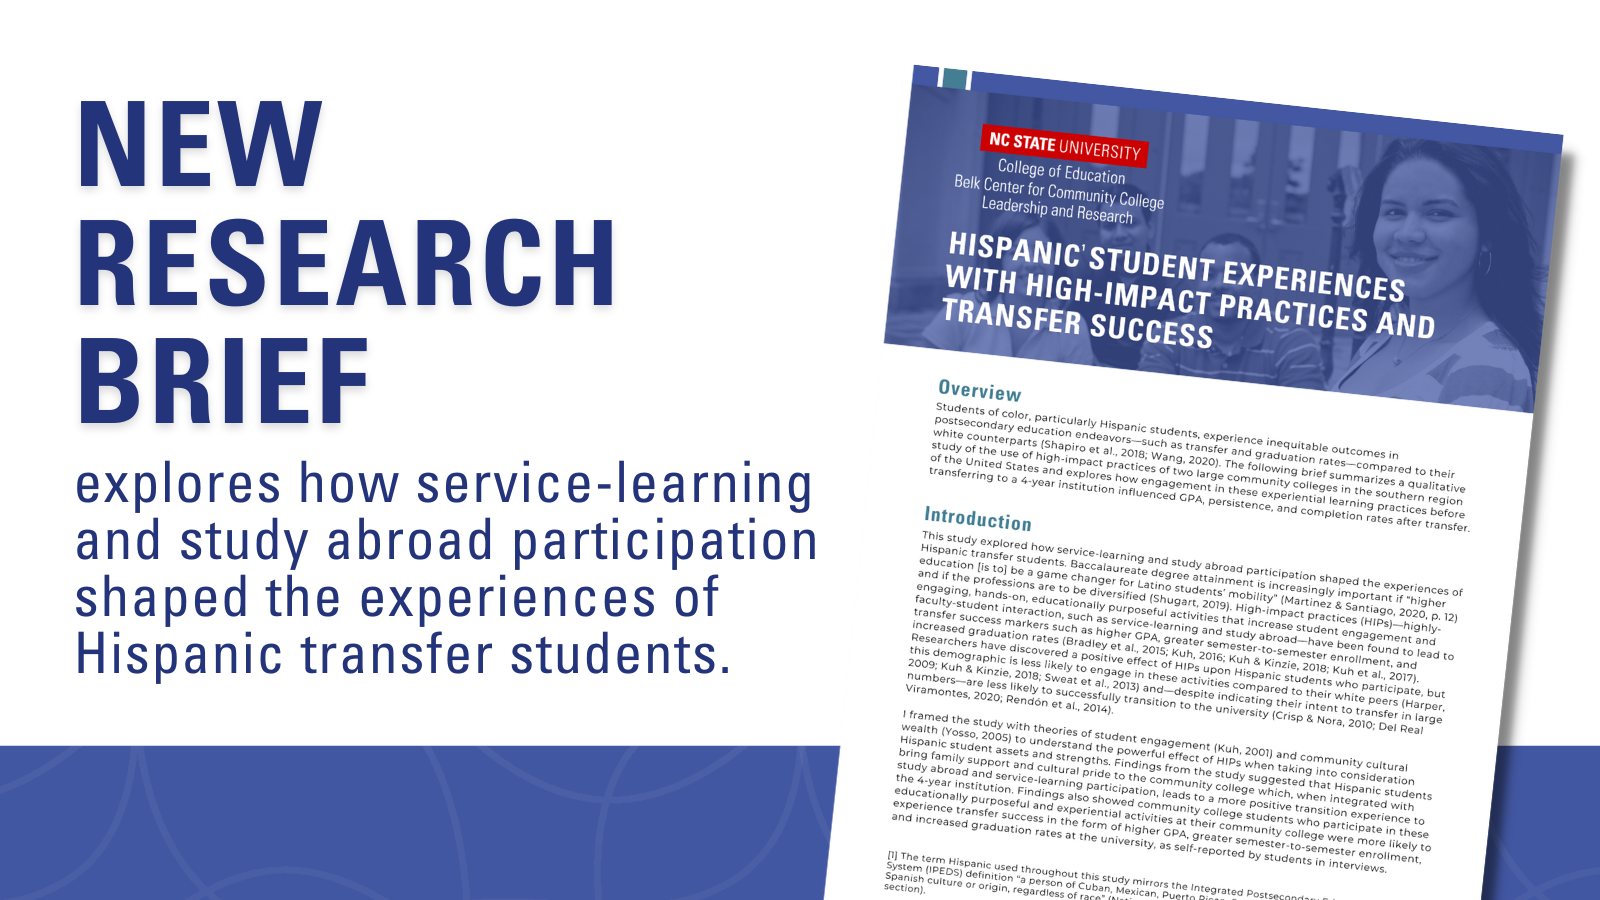 New research brief explores how service-learning and study abroad participation shaped the experiences of Hispanic transfer students